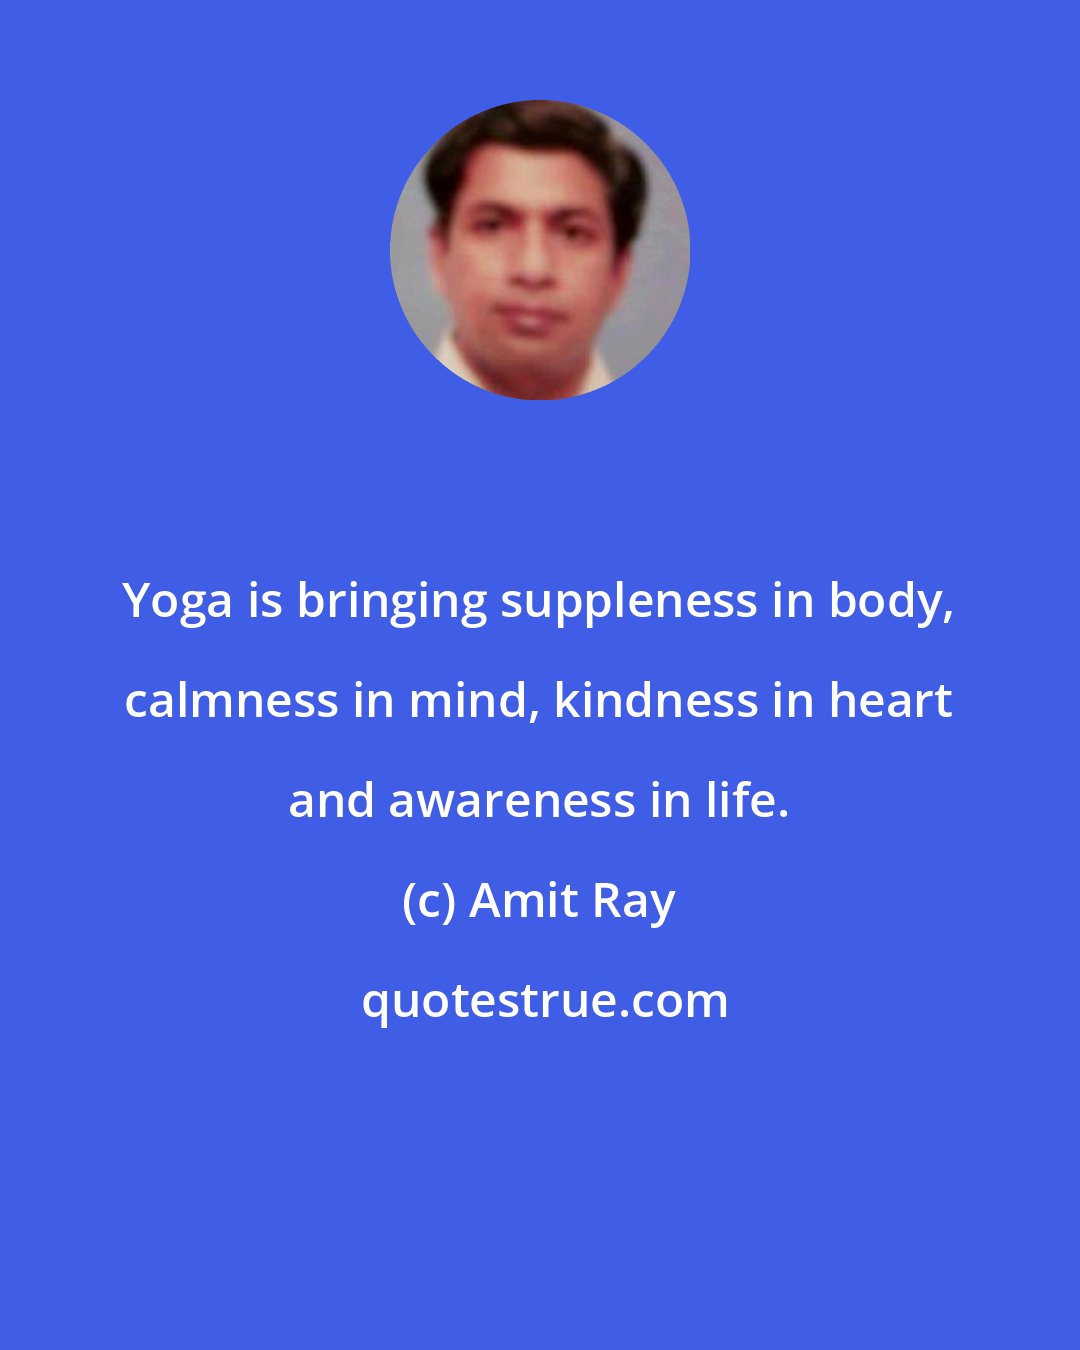 Amit Ray: Yoga is bringing suppleness in body, calmness in mind, kindness in heart and awareness in life.